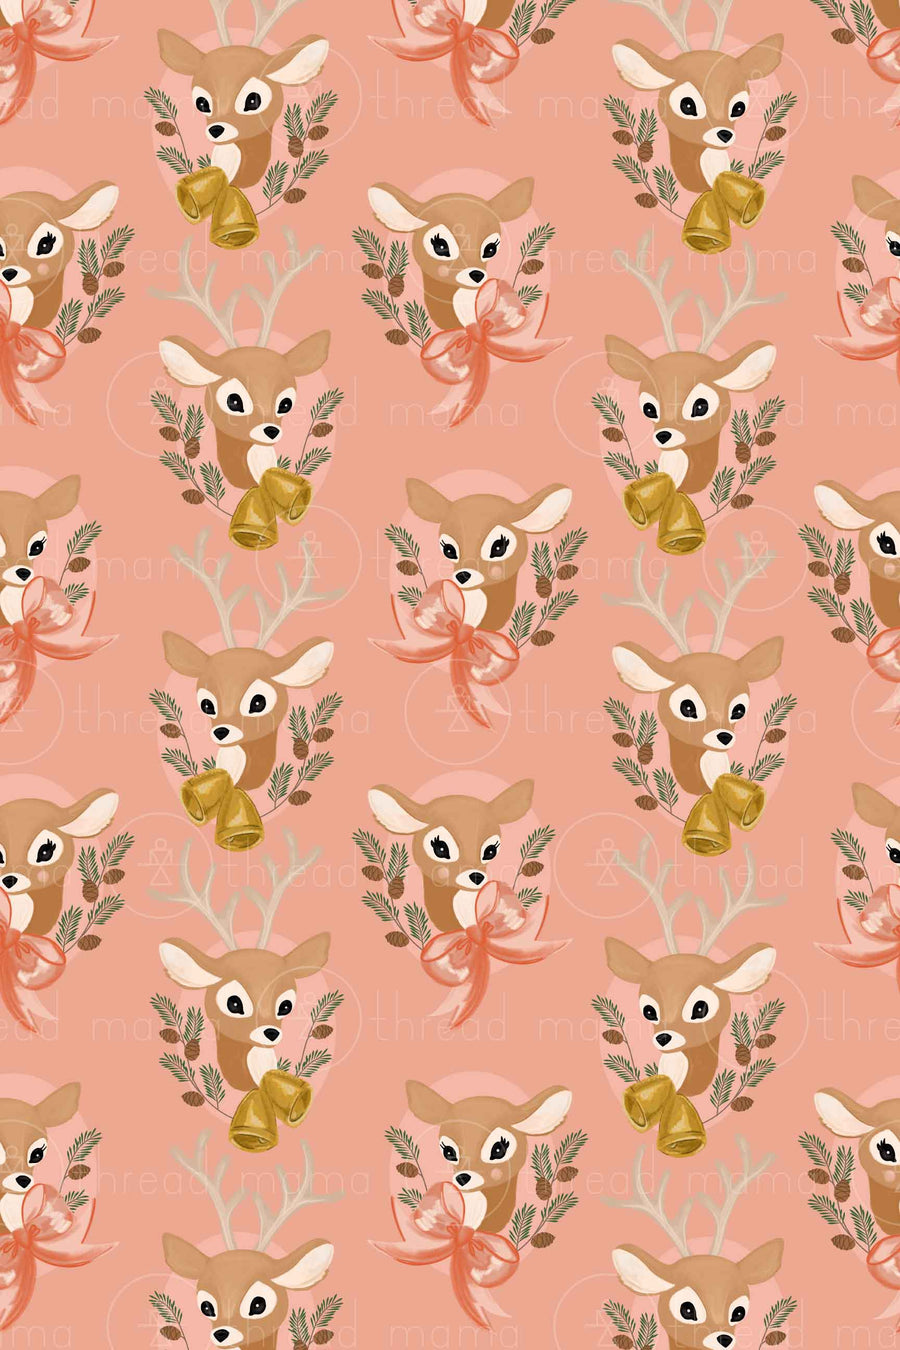 Background Pattern #24 (Printable Poster)